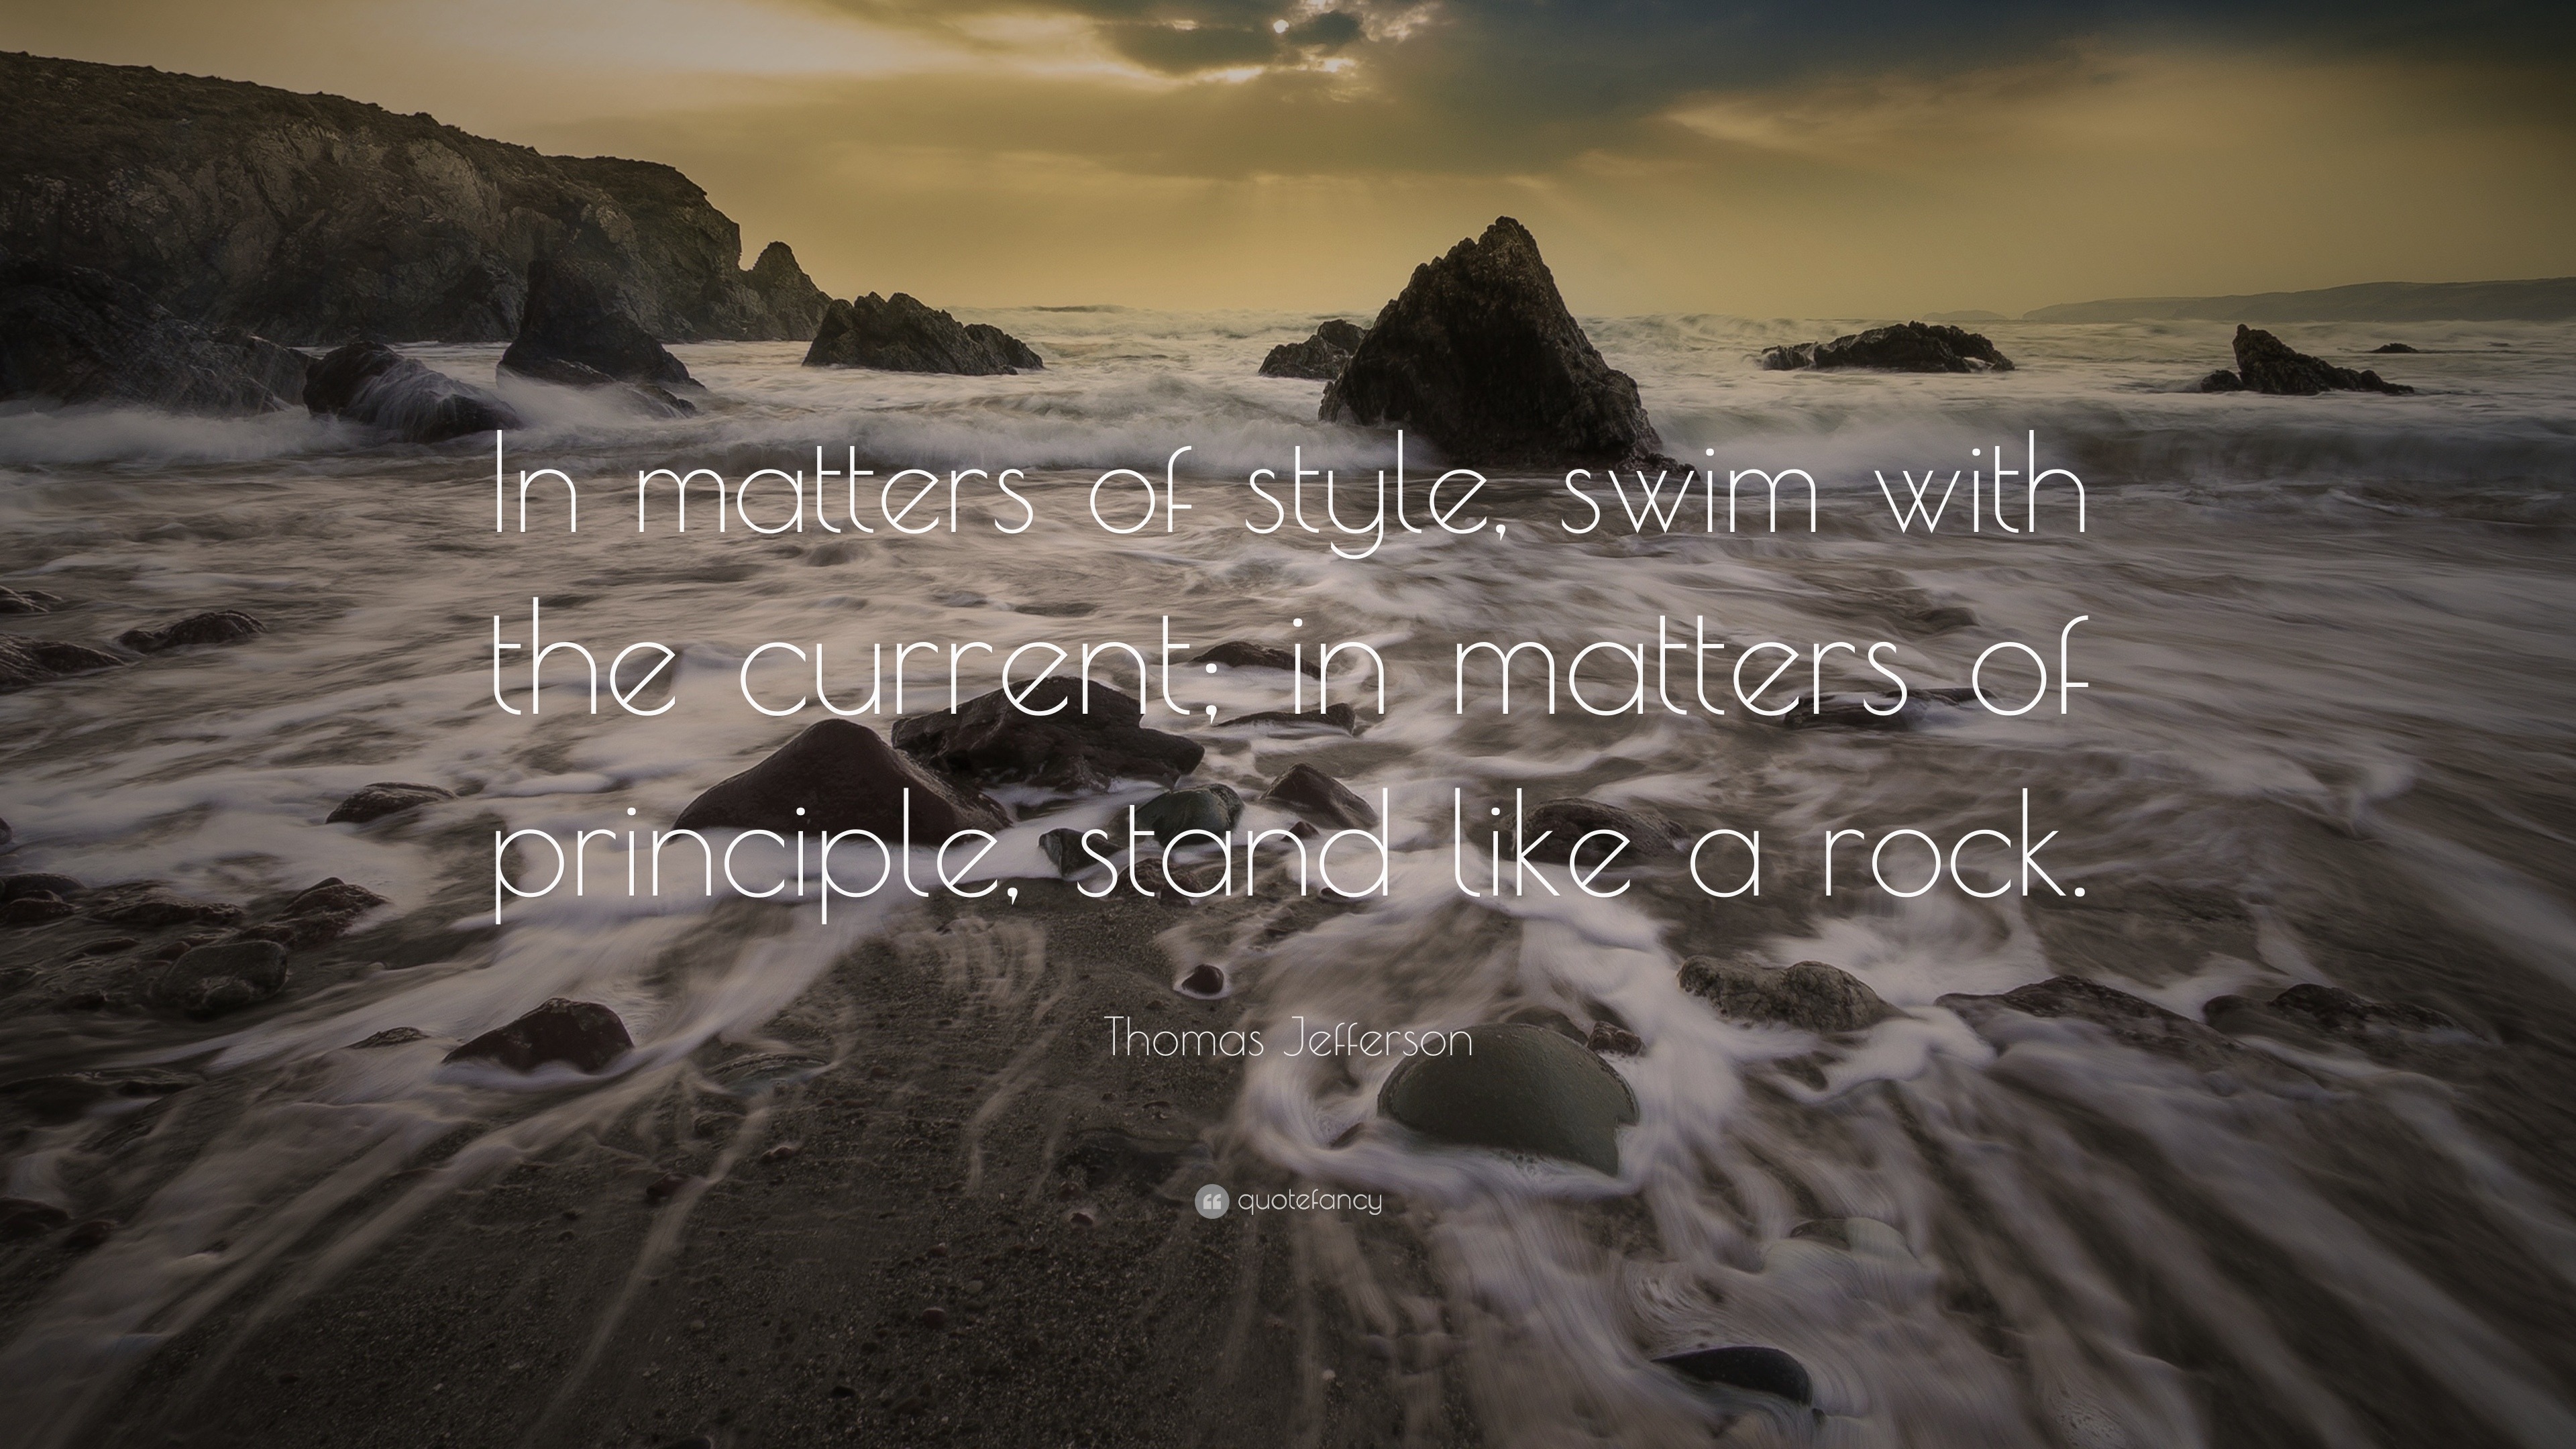 Thomas Jefferson Quote “In matters of style swim with the current in